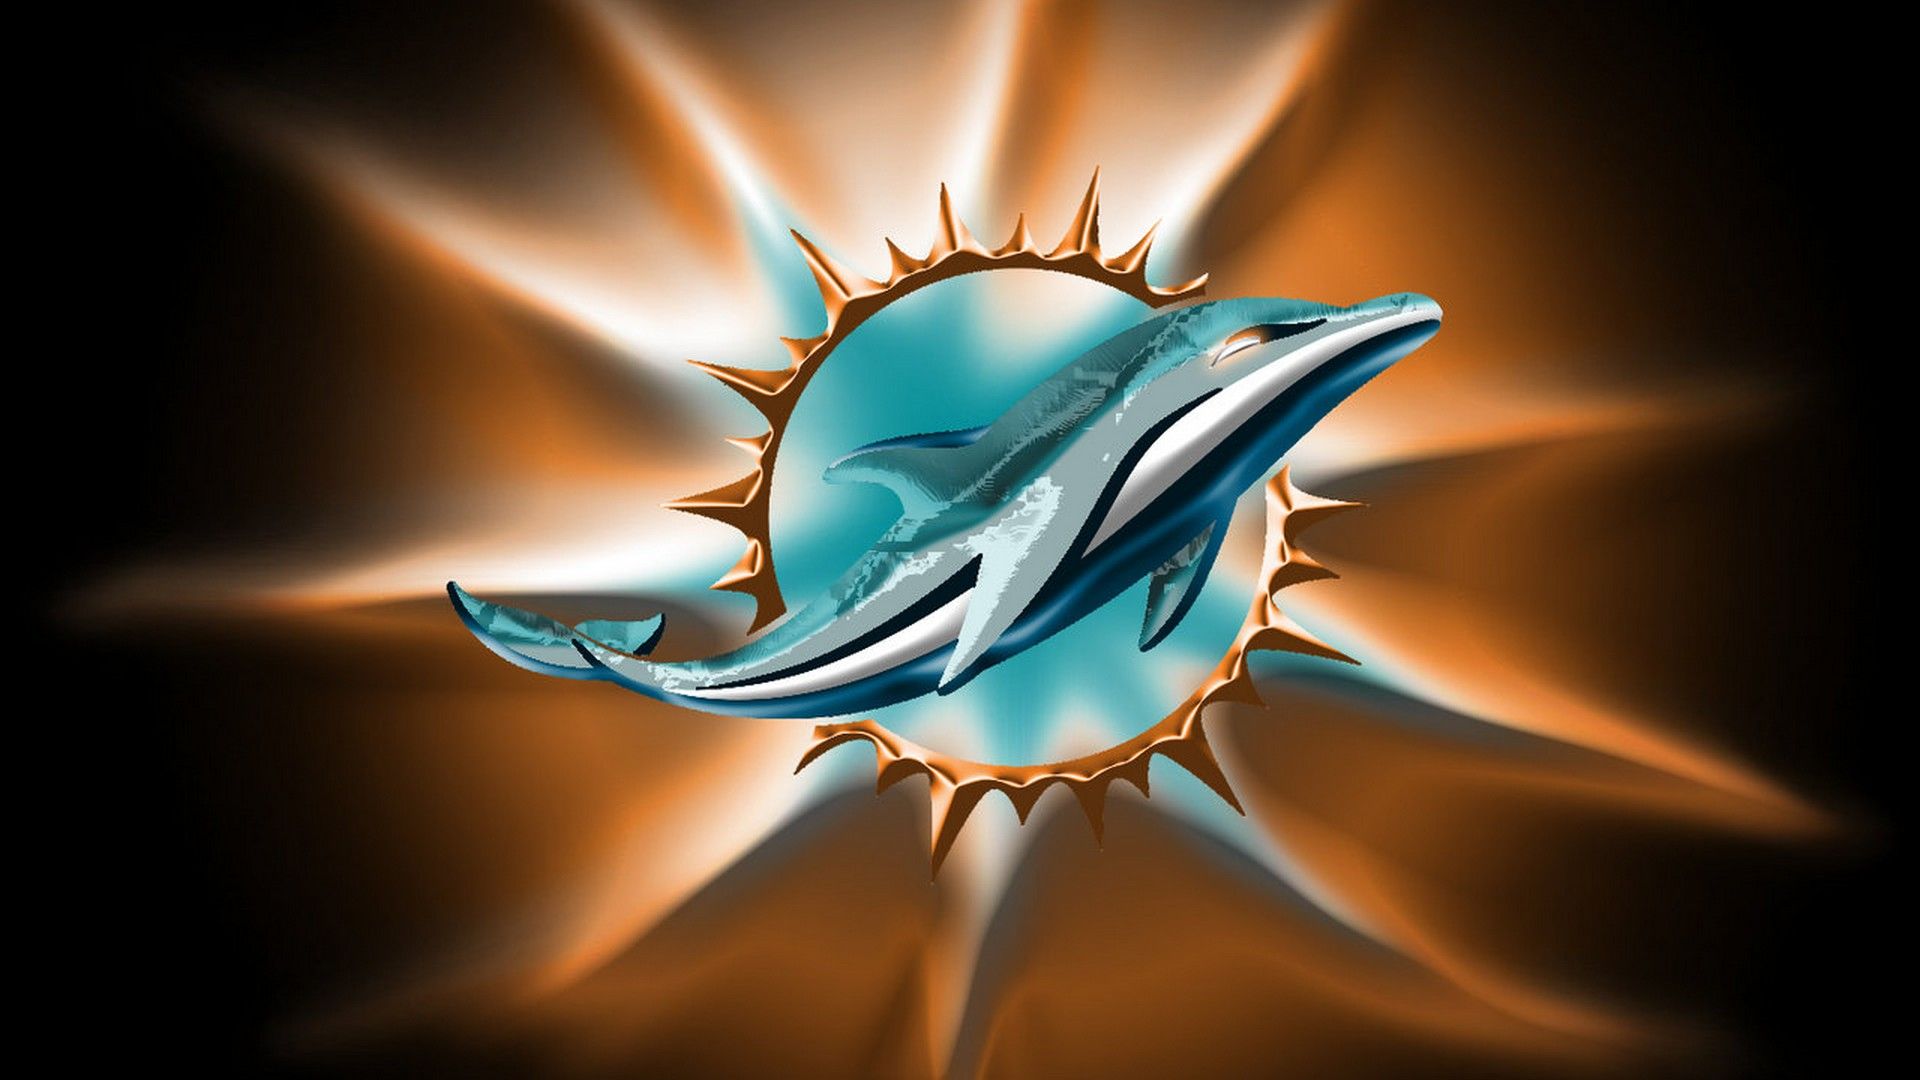 Miami Dolphins Background HD NFL Football Wallpaper. Miami dolphins, Miami dolphins wallpaper, Miami dolphins memes